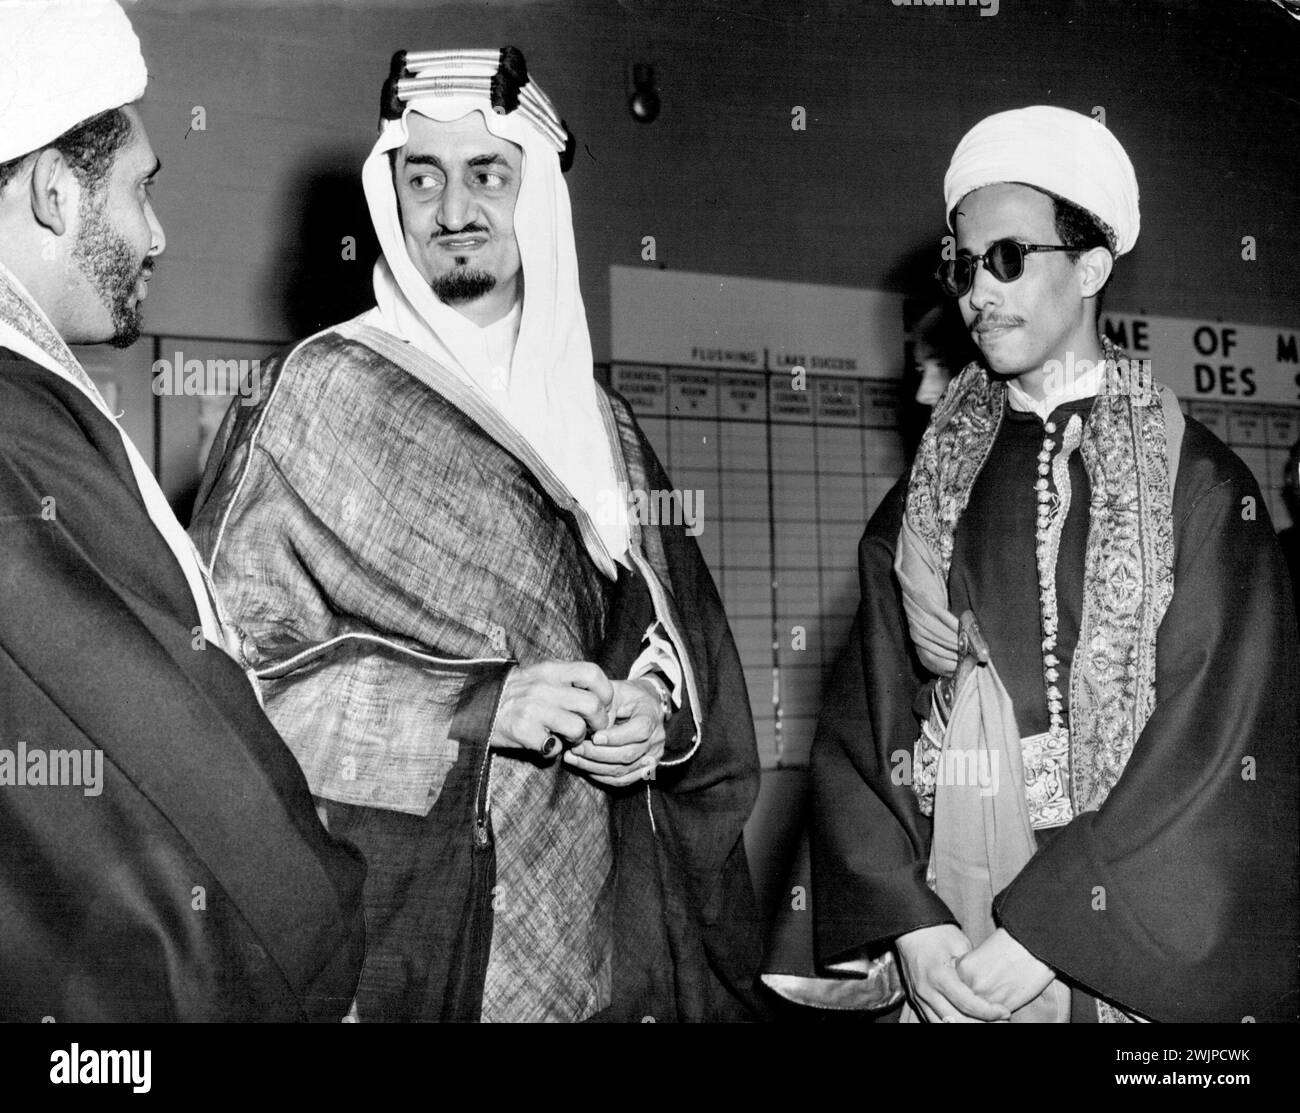 Arab U.N. Delegates Confer on Palestine -- Delegates for two of the Arab League Nations to the United Nations Confer at Flushing Meadow, New York, May 14, During the plenary session held as the British Mandate over Palestine ended. Left to Right are: Sayed Hassan Ibrahim, Yemen's Chief Delegate; Prince Faisal Al-Aaud, Saudi Arabia's Chief Delegate, and Sayed Abdel Rahman Abdel Samad, of Yemen. May 14, 1948. (Photo by Associated Press Photo). Stock Photo